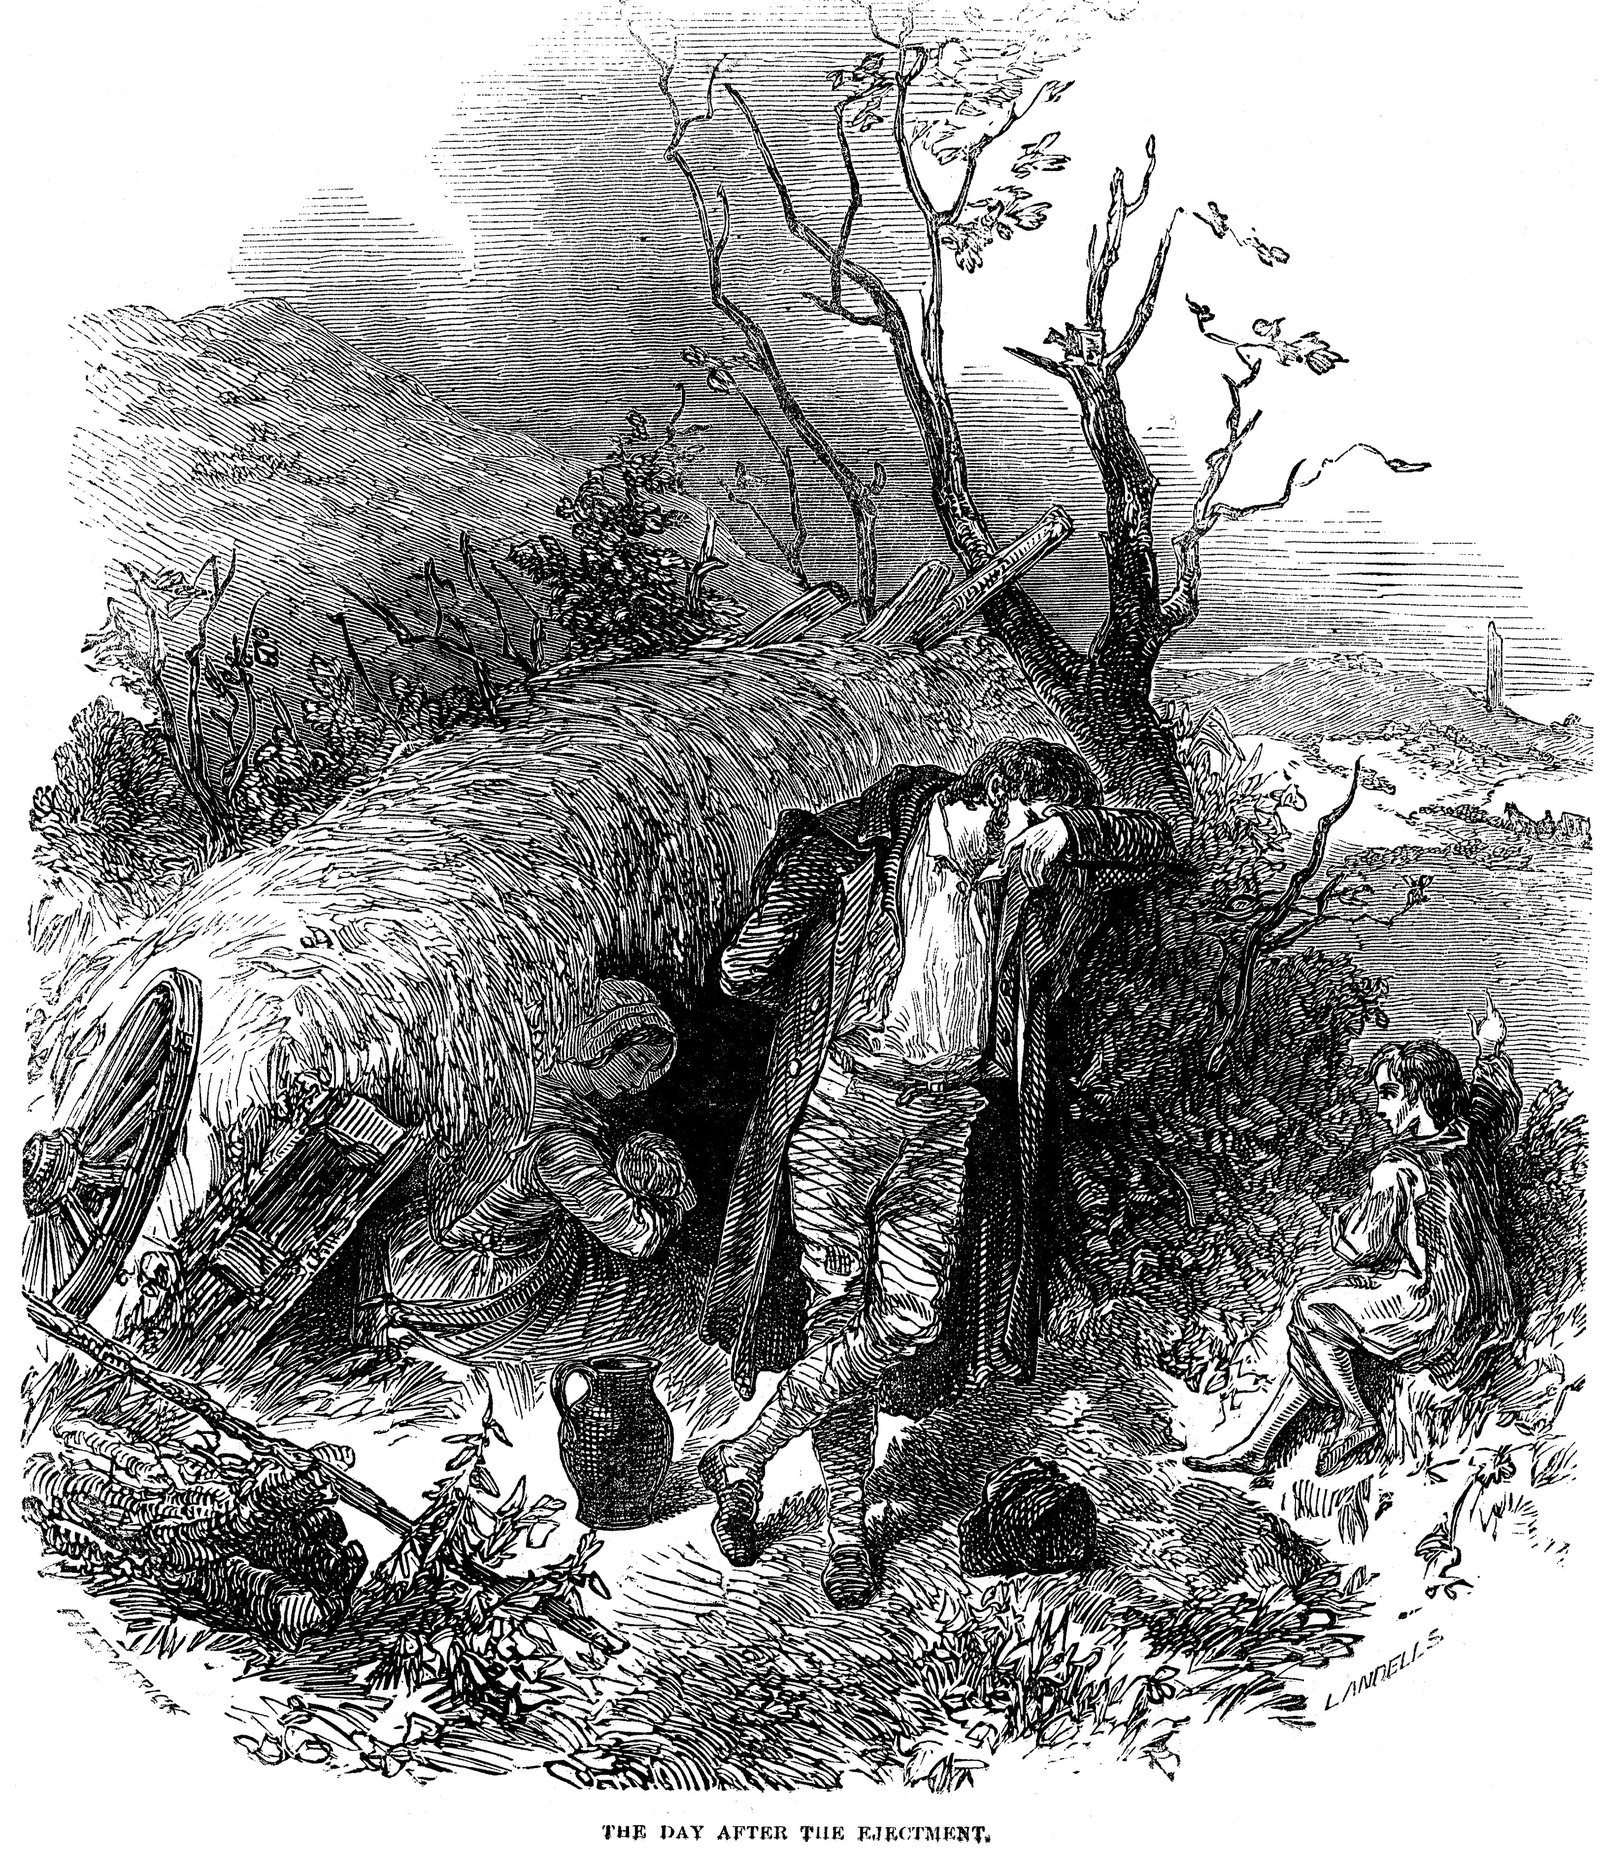 Image - Irish peasant family finding shelter in a hedgerow the day after eviction from their cottage. From The Illustrated London News, December 1848. Wood engraving. Source: Ann Ronan Pictures/Print Collector/Getty Images